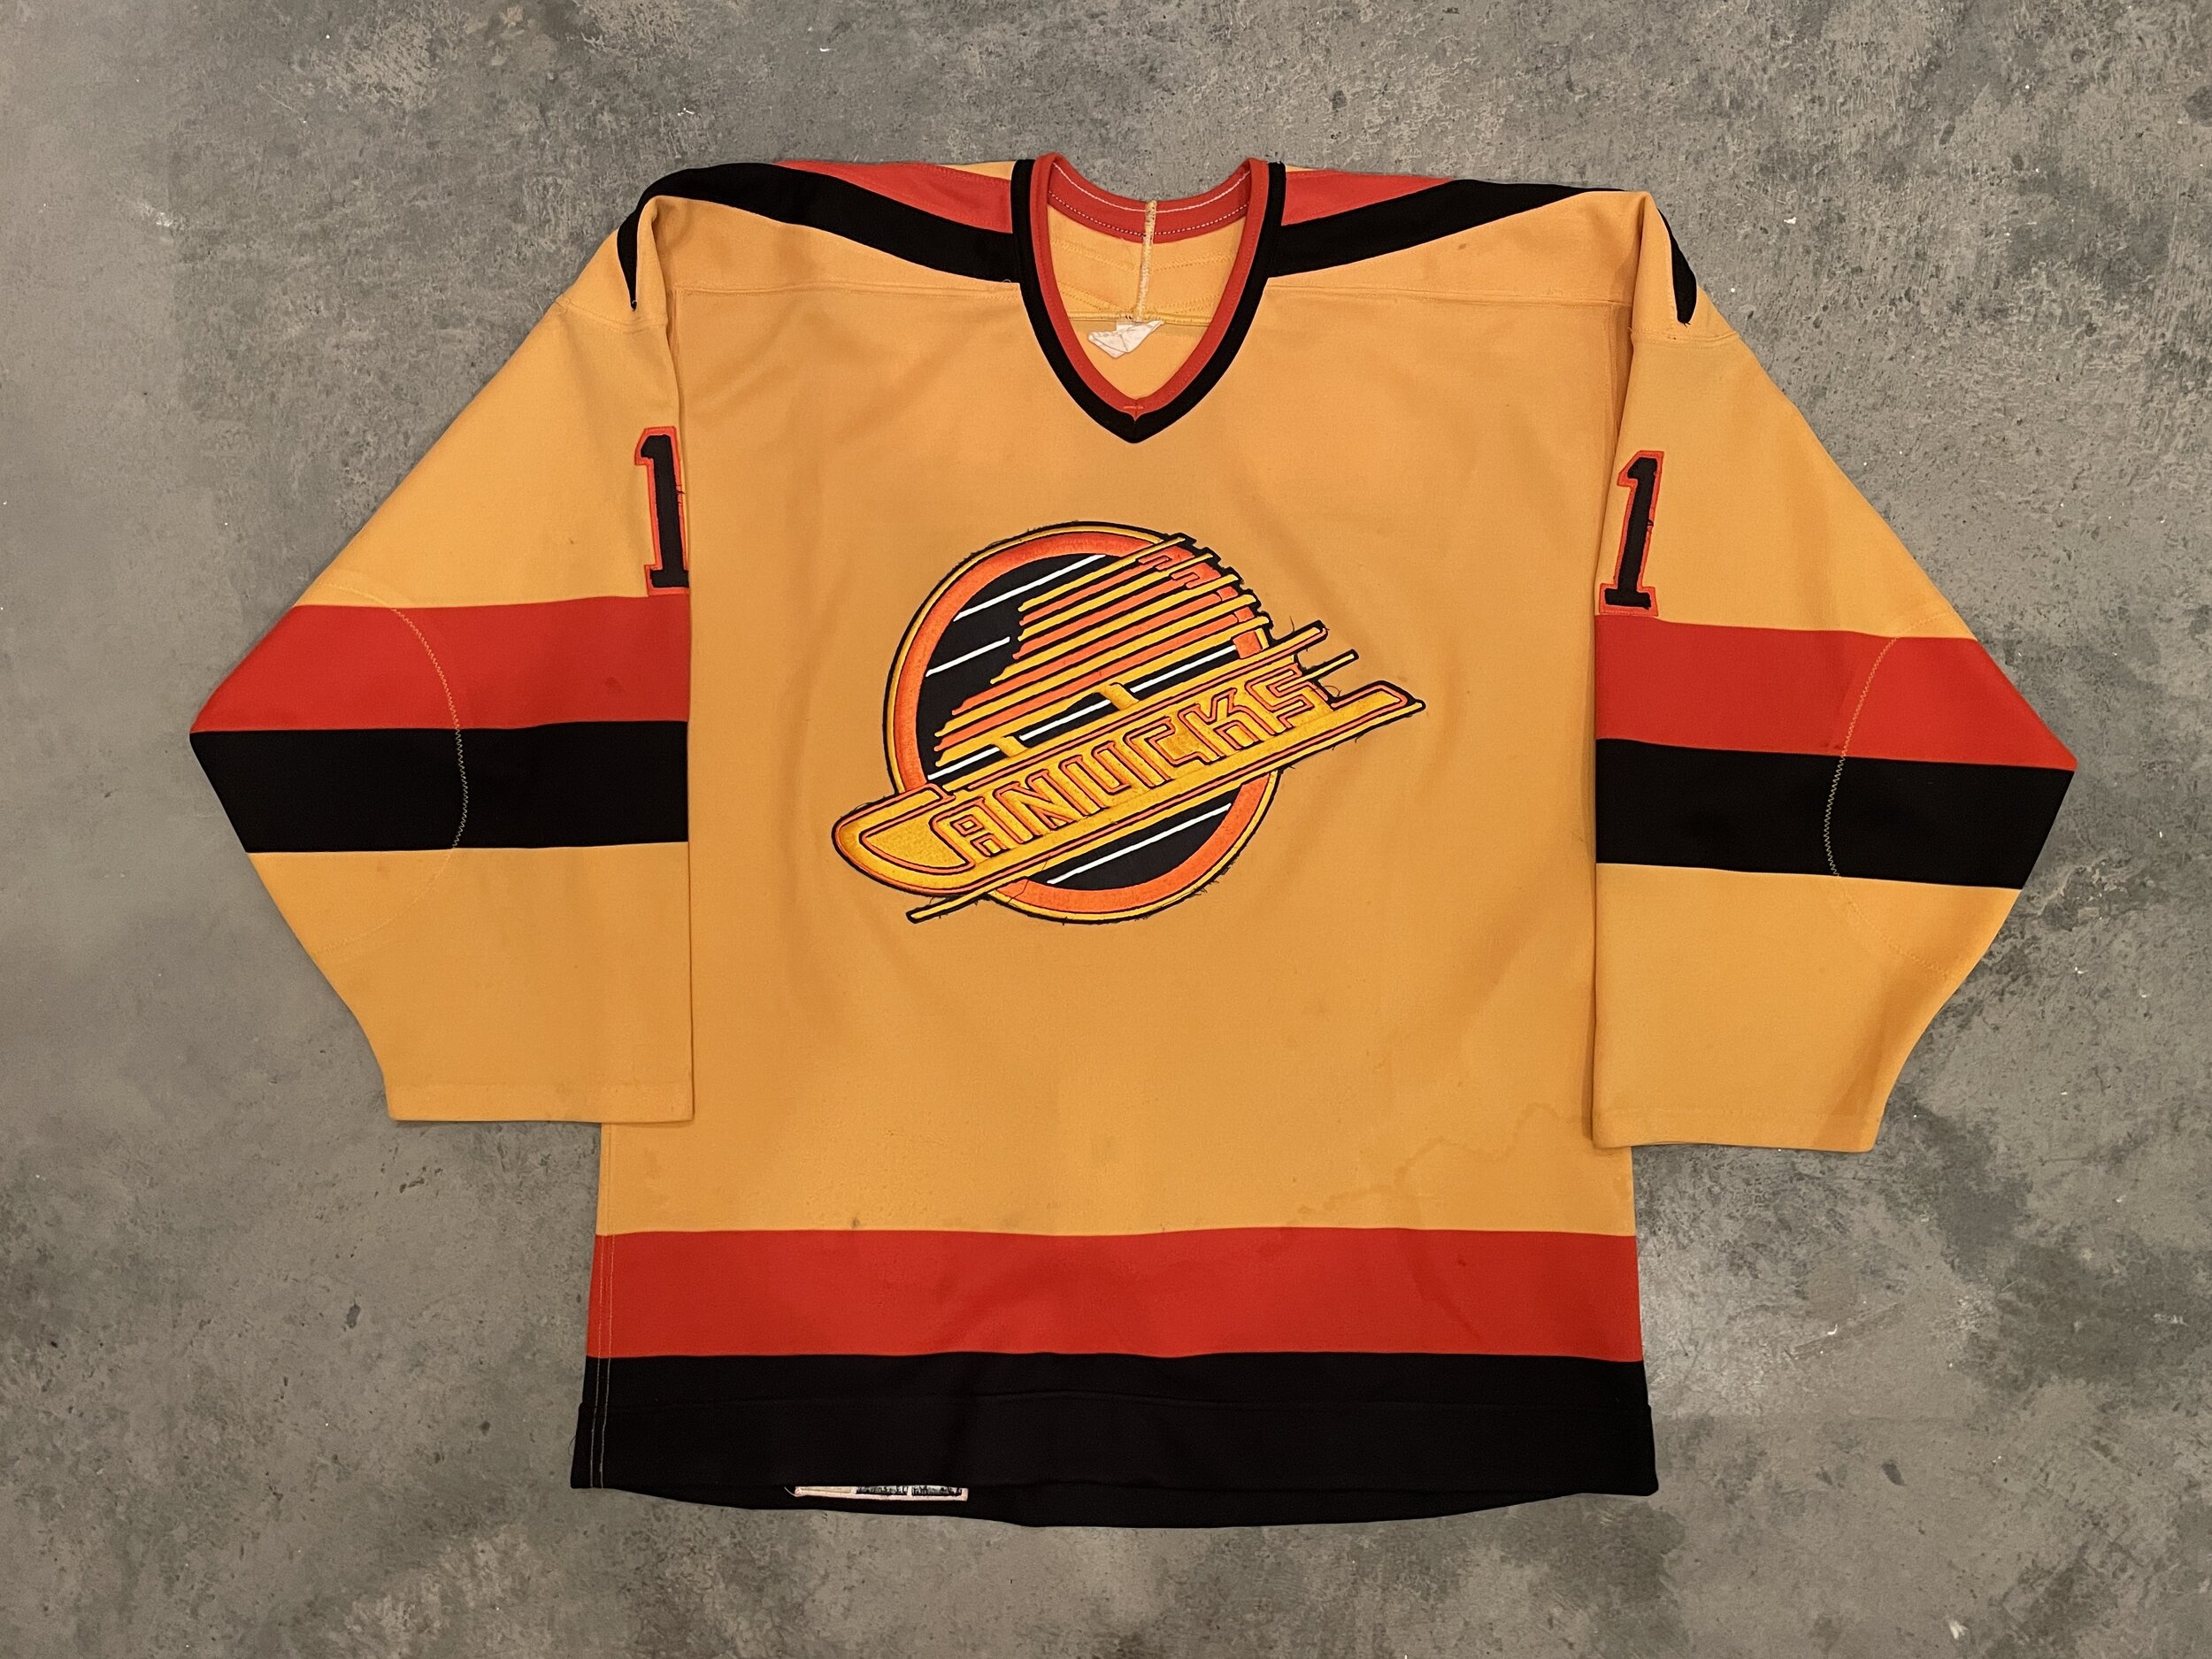 Vintage Vancouver Canucks Game-Worn Jersey - late 1950s